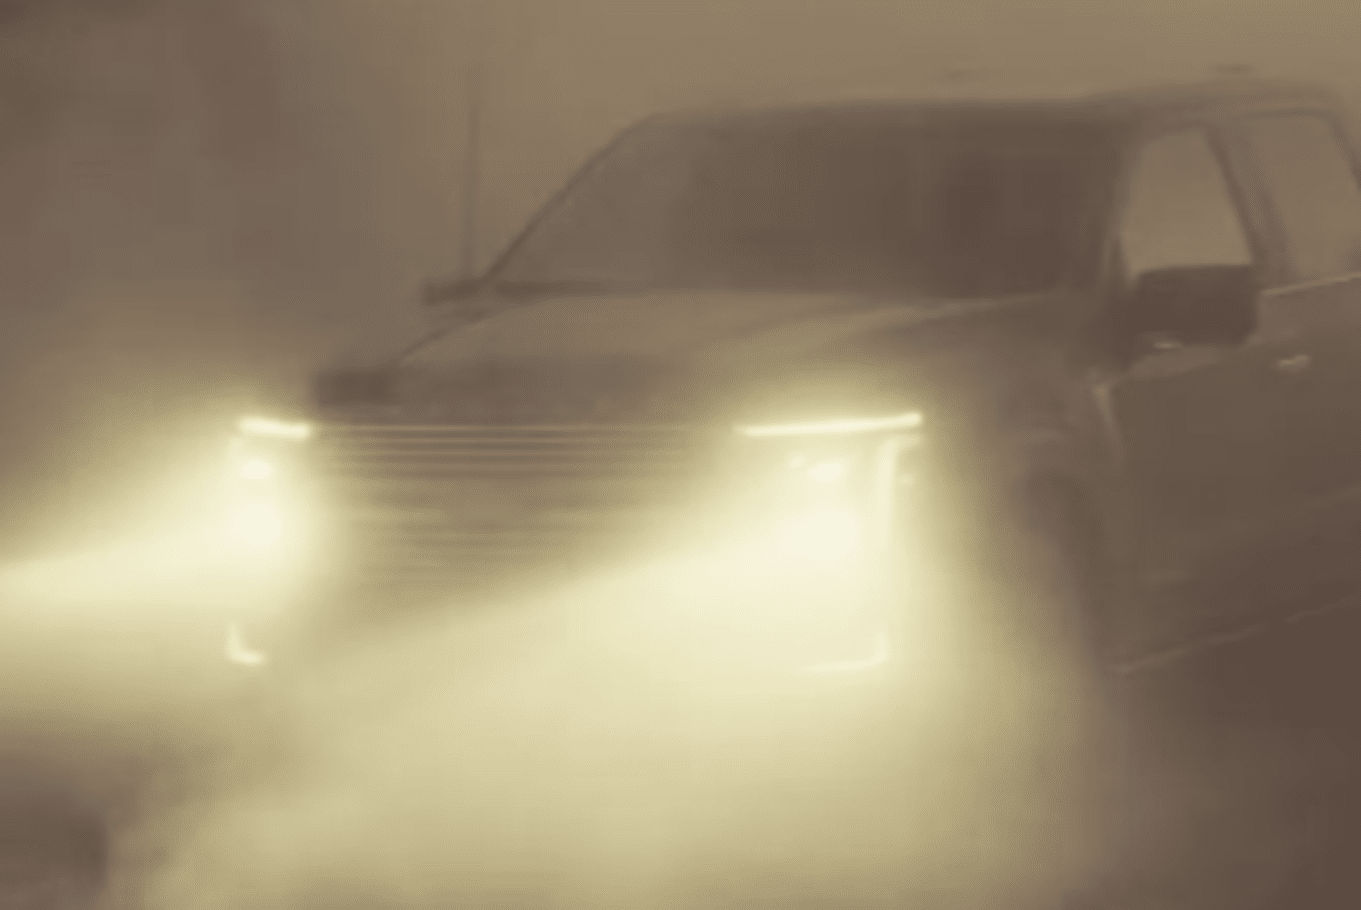 Ford Teases Updated F-150 Ahead of Reveal